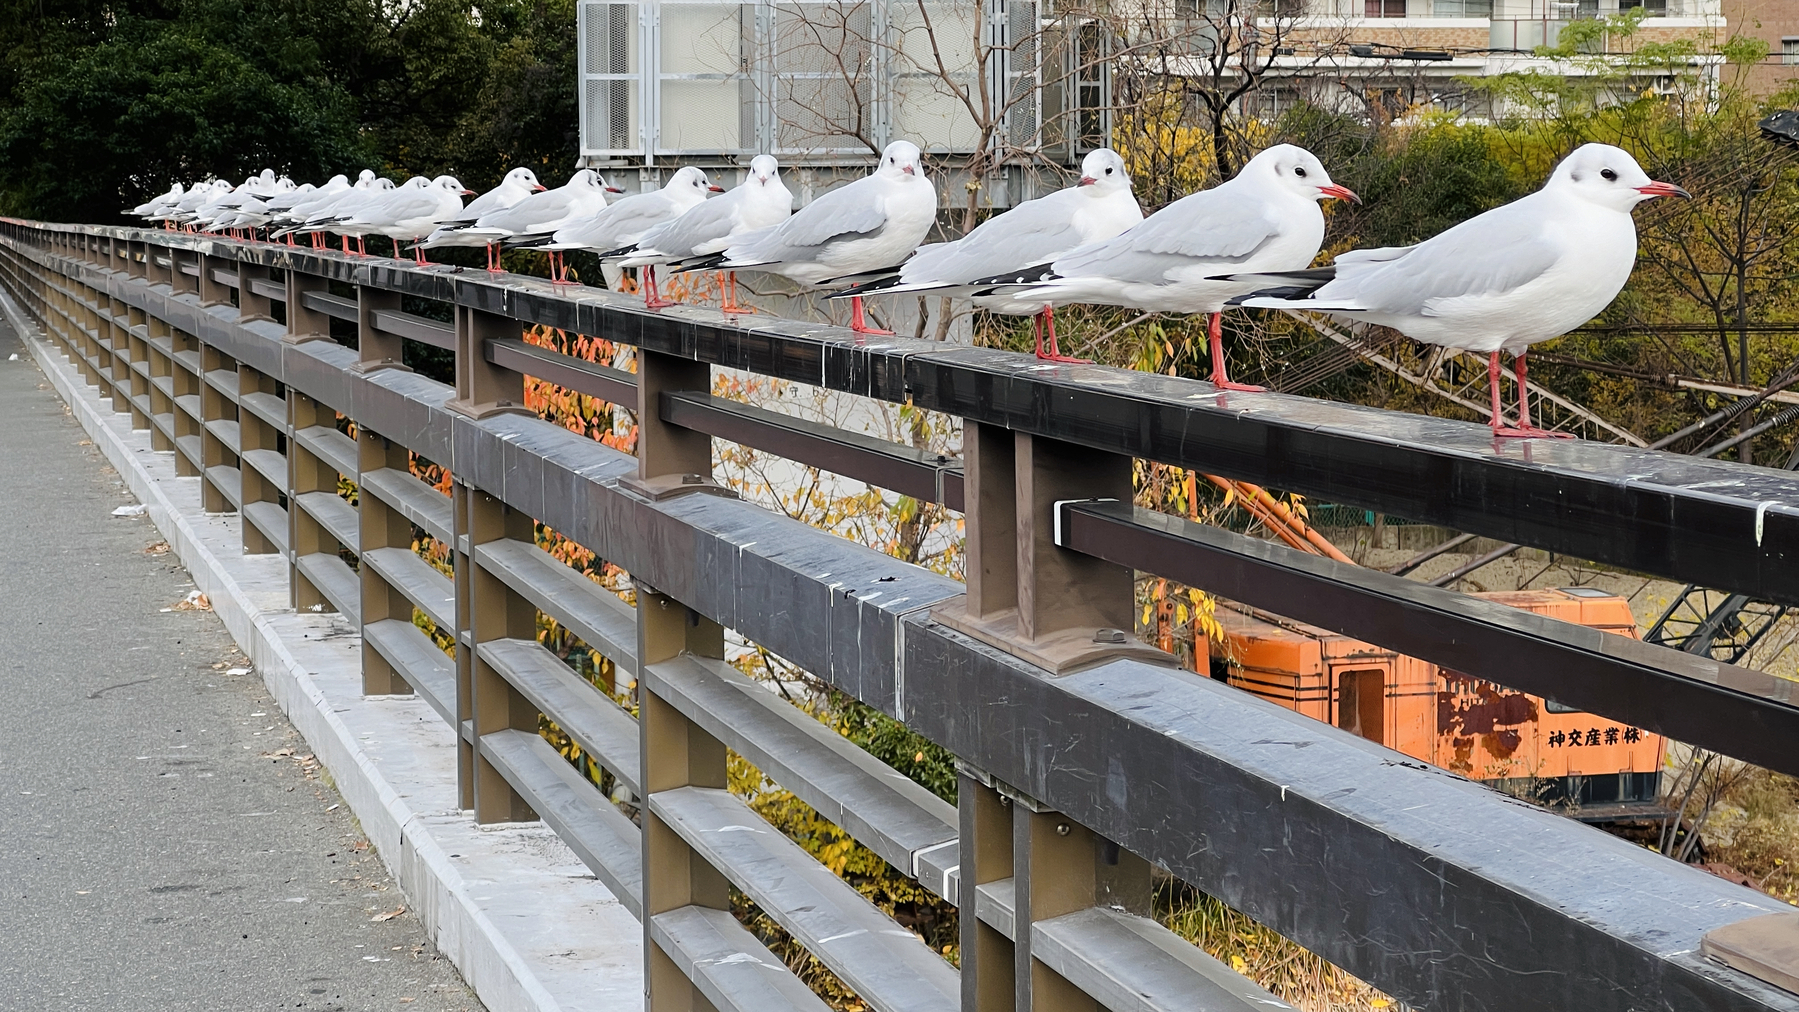 more than 20 seagull all lined up, standing on the side of the bridge walkway